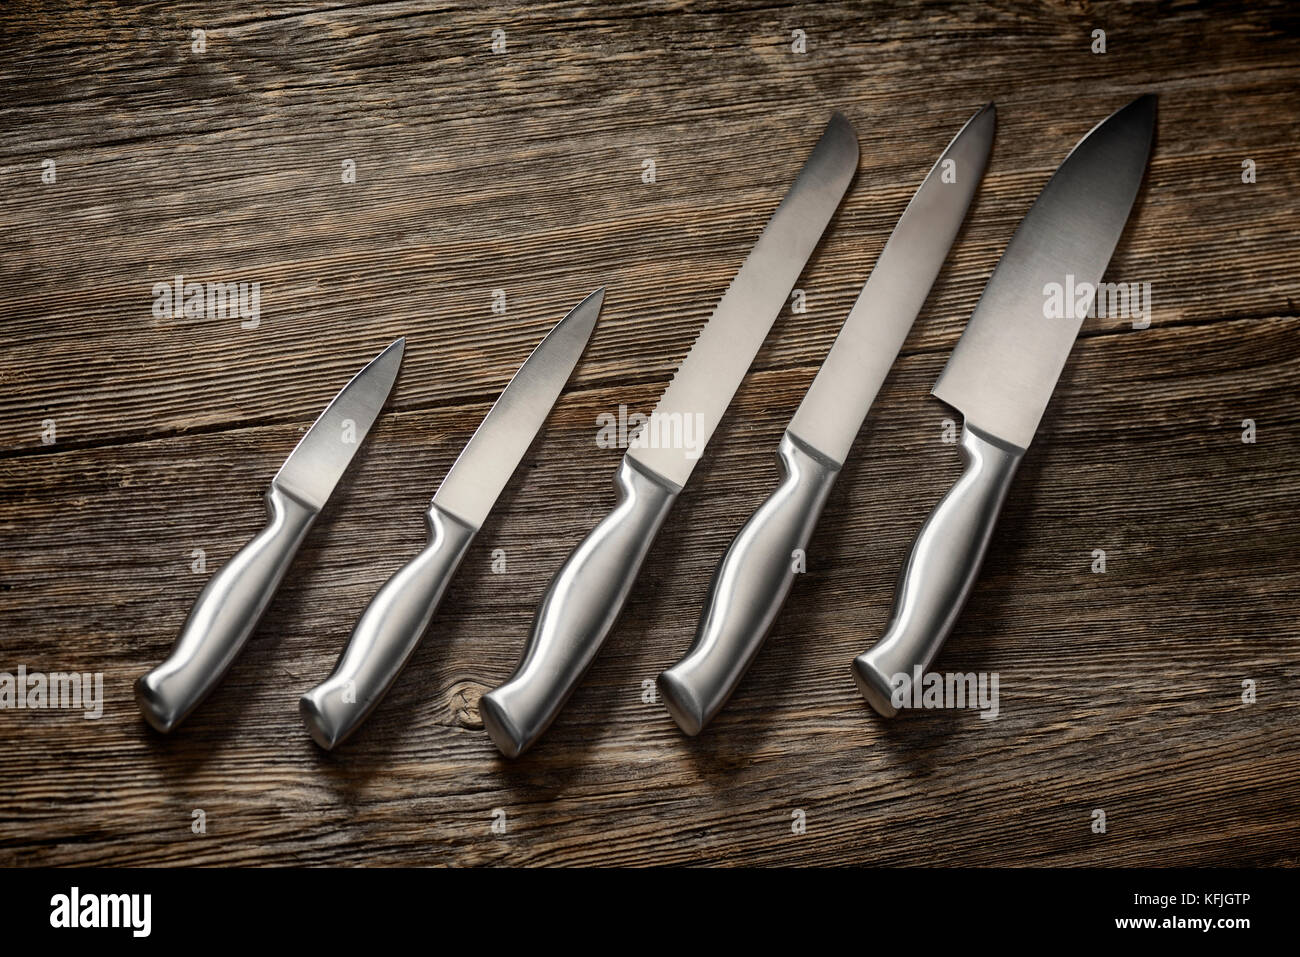 Metal kitchen knives set on rustic wood background Stock Photo